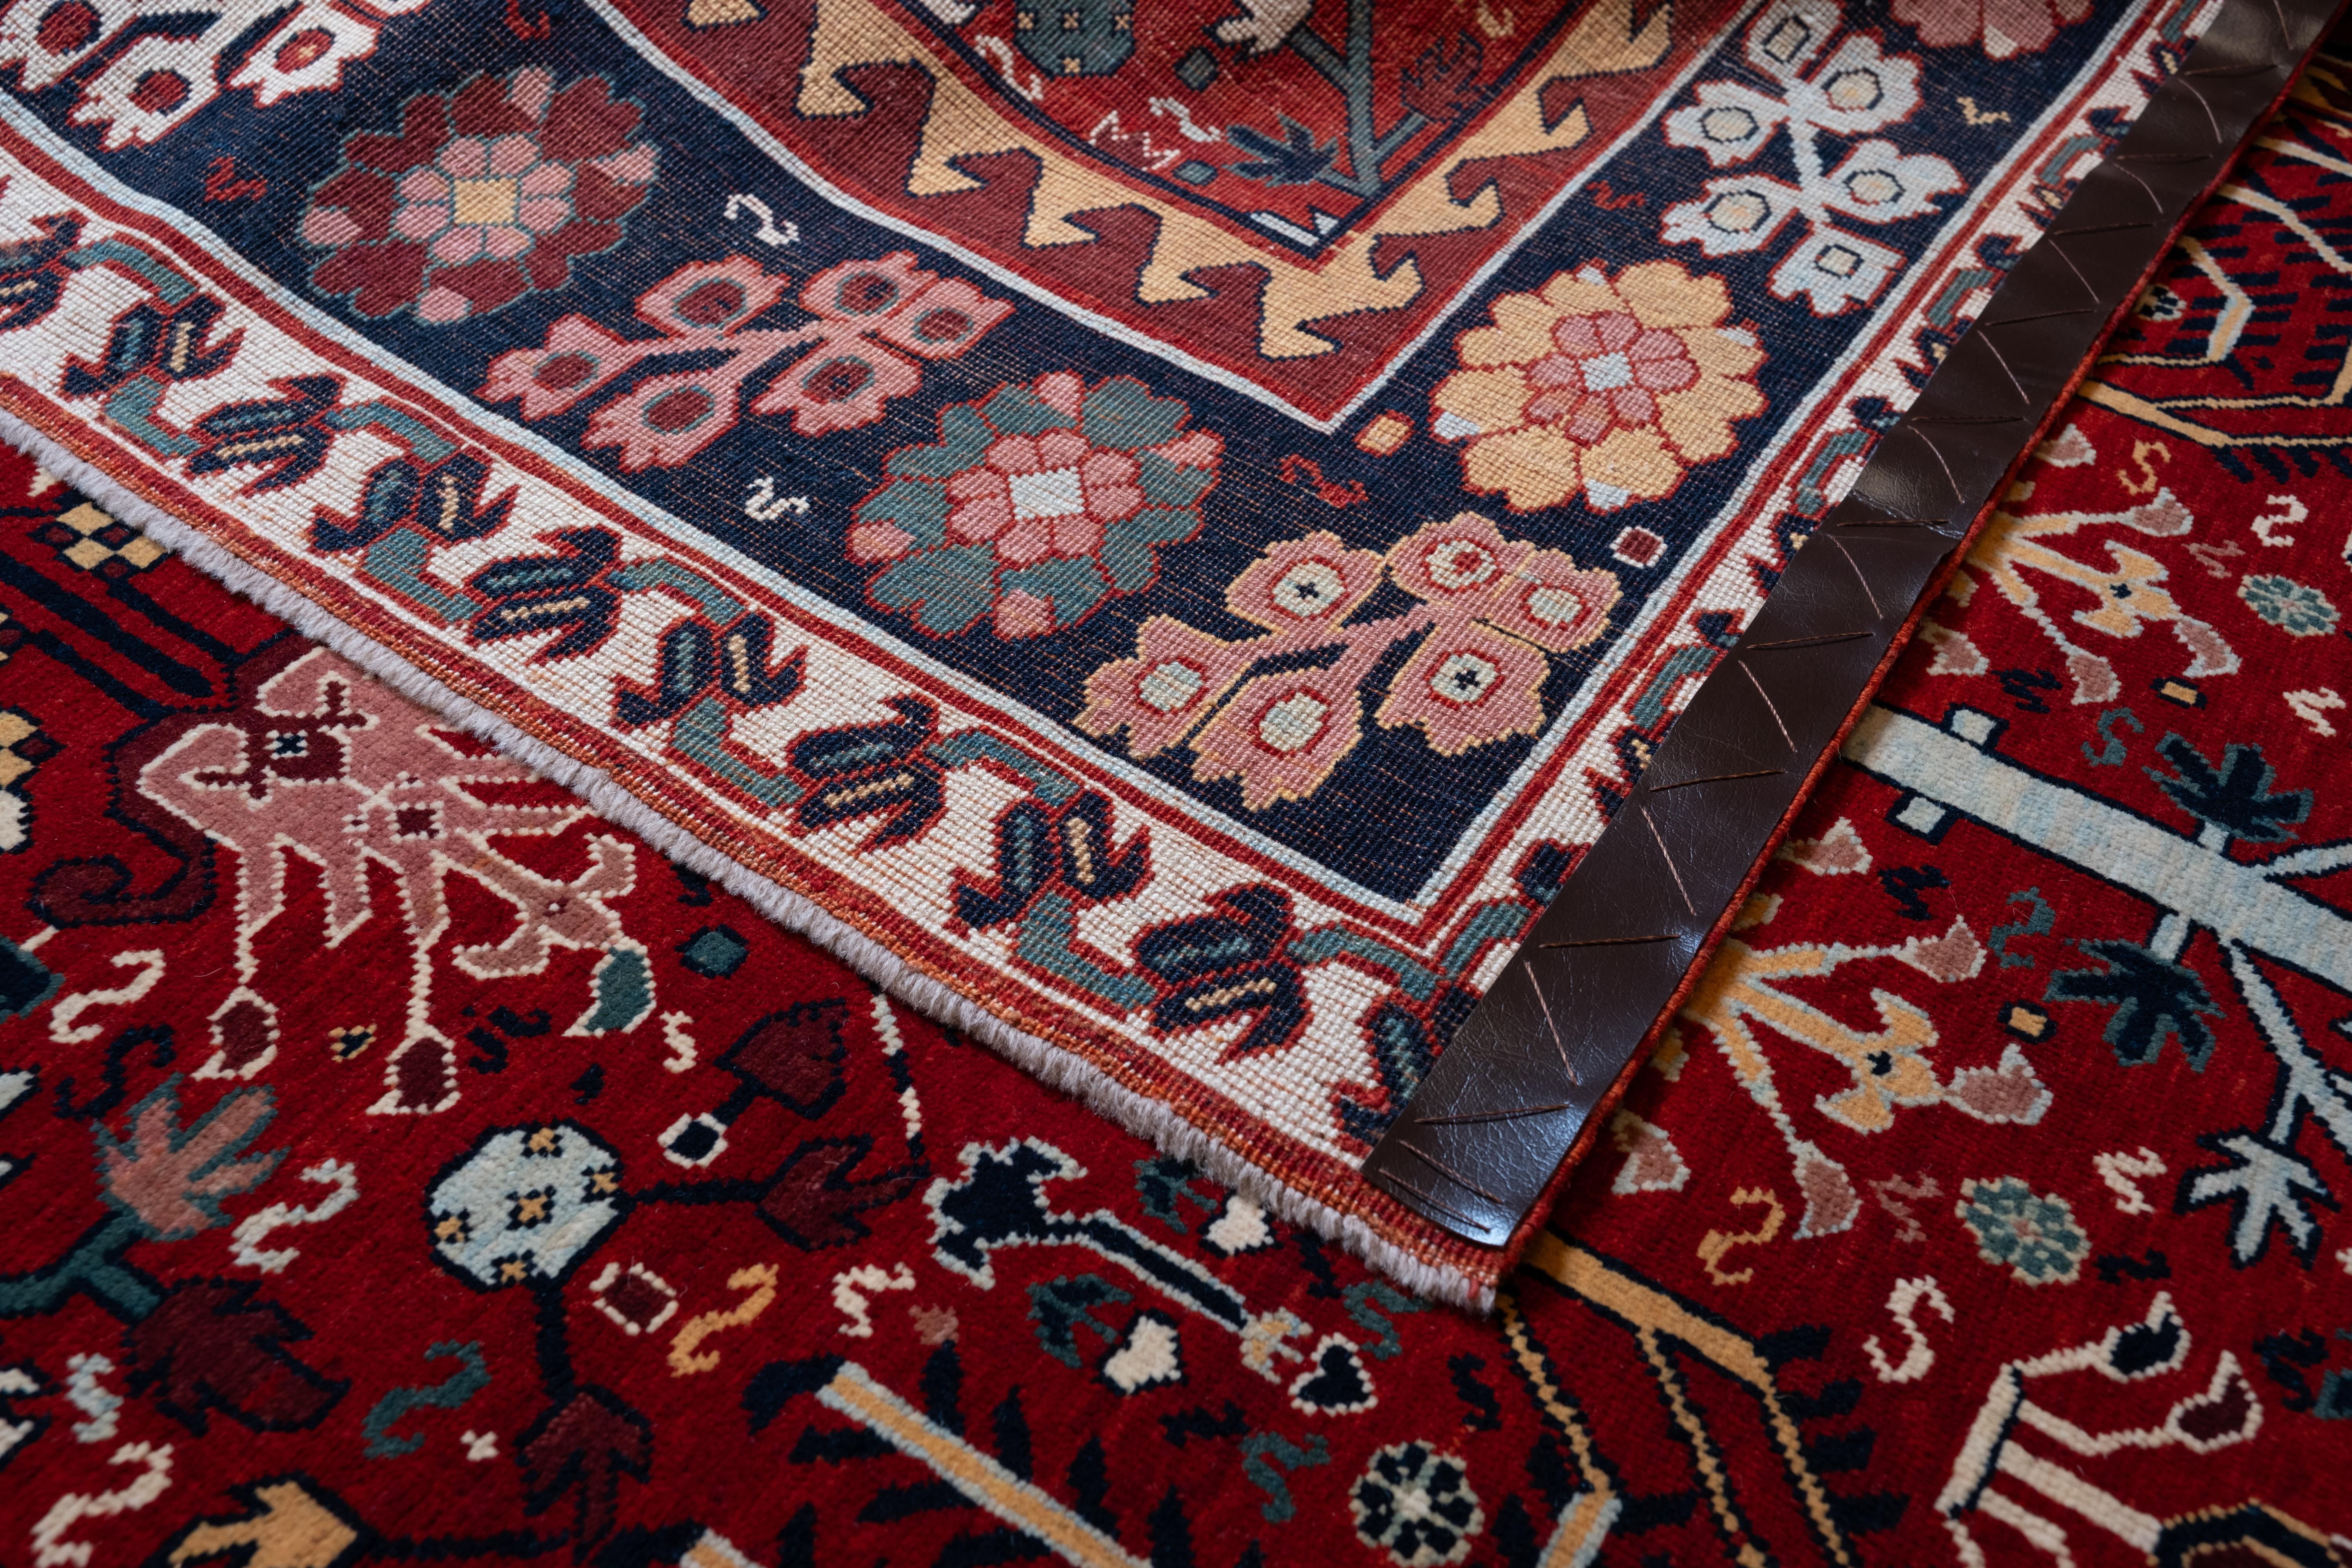 Hand-Knotted Ararat Rugs Bid Majnum on Red Field Rug, 17th C Revival Carpet, Natural Dyed For Sale